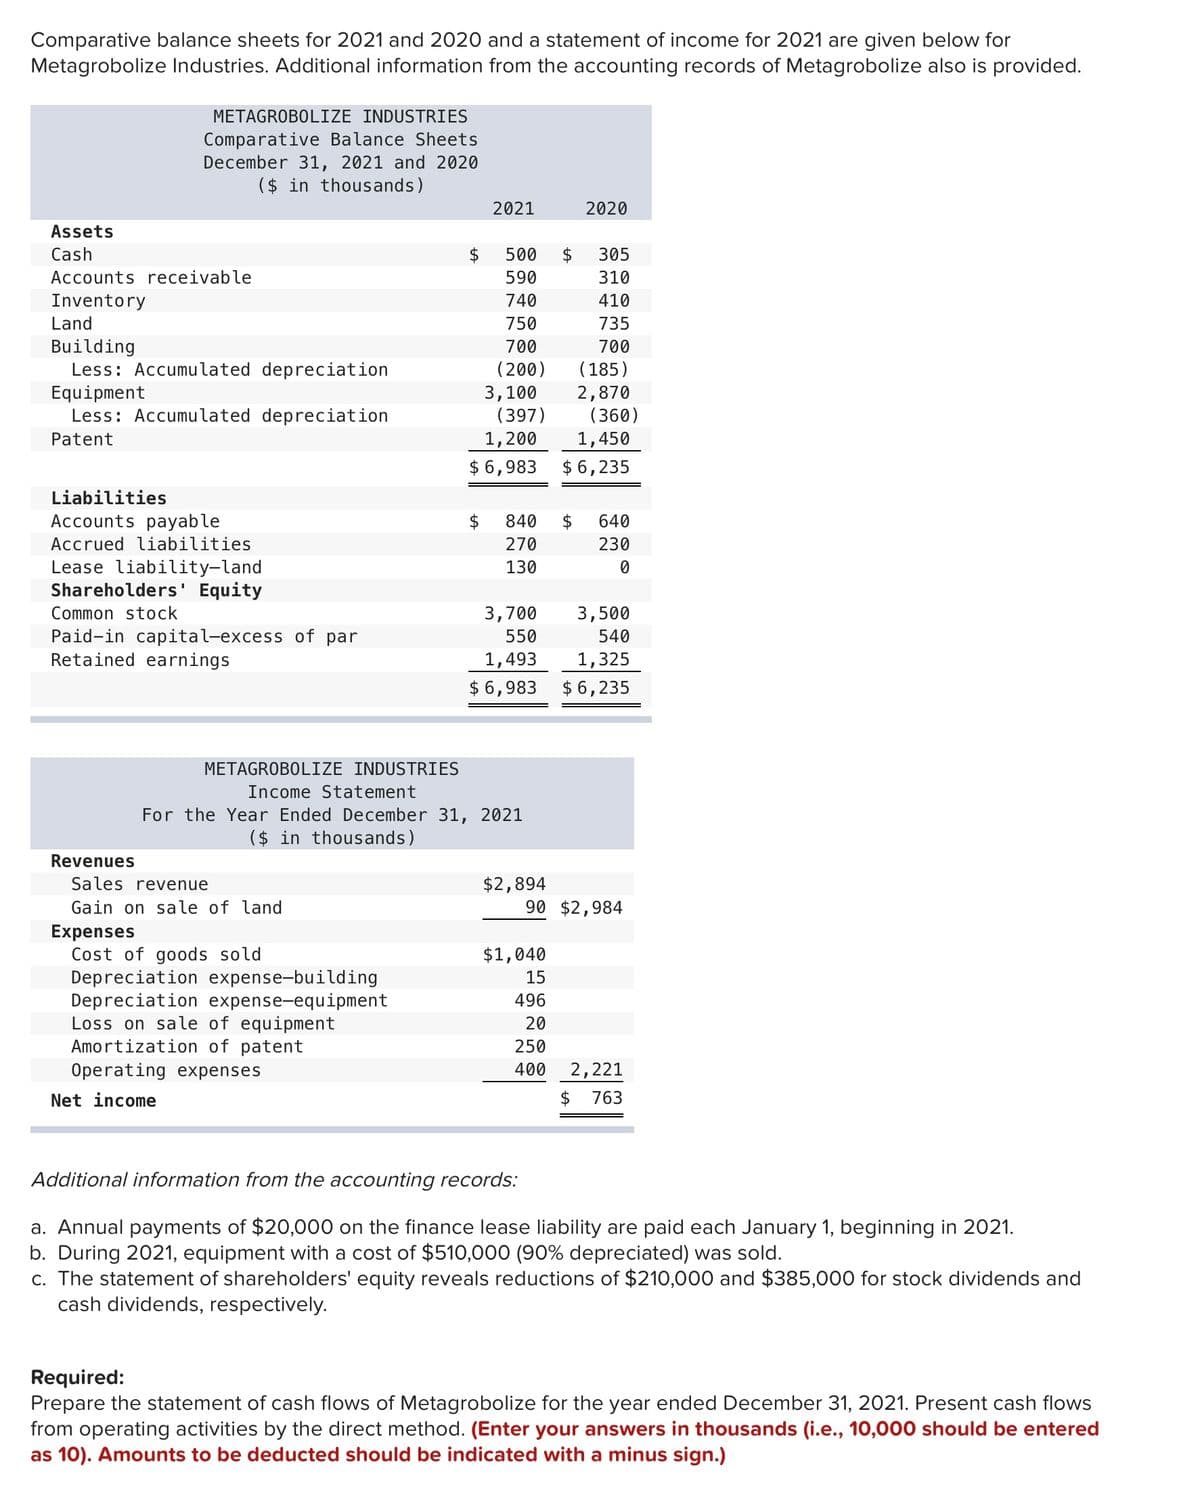 Comparative balance sheets for 2021 and 2020 and a statement of income for 2021 are given below for
Metagrobolize Industries. Additional information from the accounting records of Metagrobolize also is provided.
METAGROBOLIZE INDUSTRIES
Comparative Balance Sheets
December 31, 2021 and 2020
($ in thousands)
2021
2020
Assets
Cash
500
305
Accounts receivable
590
310
740
Inventory
Land
410
750
735
Building
Less: Accumulated depreciation
Equipment
Less: Accumulated depreciation
700
700
(200)
(185)
3,100
(397)
2,870
(360)
1,450
Patent
1,200
$ 6,983
$ 6,235
Liabilities
Accounts payable
2$
840
2$
640
Accrued liabilities
270
230
Lease liability-land
Shareholders' Equity
130
Common stock
3,700
3,500
Paid-in capital-excess of par
Retained earnings
550
540
1,493
1,325
$ 6,983 $ 6, 235
METAGROBOLIZE INDUSTRIES
Income Statement
For the Year Ended December 31, 2021
($ in thousands)
Revenues
$2,894
90 $2,984
Sales revenue
Gain on sale of land
Expenses
Cost of goods sold
Depreciation expense-building
Depreciation expense-equipment
Loss on sale of equipment
Amortization of patent
Operating expenses
$1,040
15
496
20
250
400
2,221
Net income
$ 763
Additional information from the accounting records:
a. Annual payments of $20,000 on the finance lease liability are paid each January 1, beginning in 2021.
b. During 2021, equipment with a cost of $510,000 (90% depreciated) was sold.
c. The statement of shareholders' equity reveals reductions of $210,000 and $385,000 for stock dividends and
cash dividends, respectively.
Required:
Prepare the statement of cash flows of Metagrobolize for the year ended December 31, 2021. Present cash flows
from operating activities by the direct method. (Enter your answers in tho
as 10). Amounts to be deducted should be indicated with a minus sign.)
sands (i.e., 10,000 should be entered
